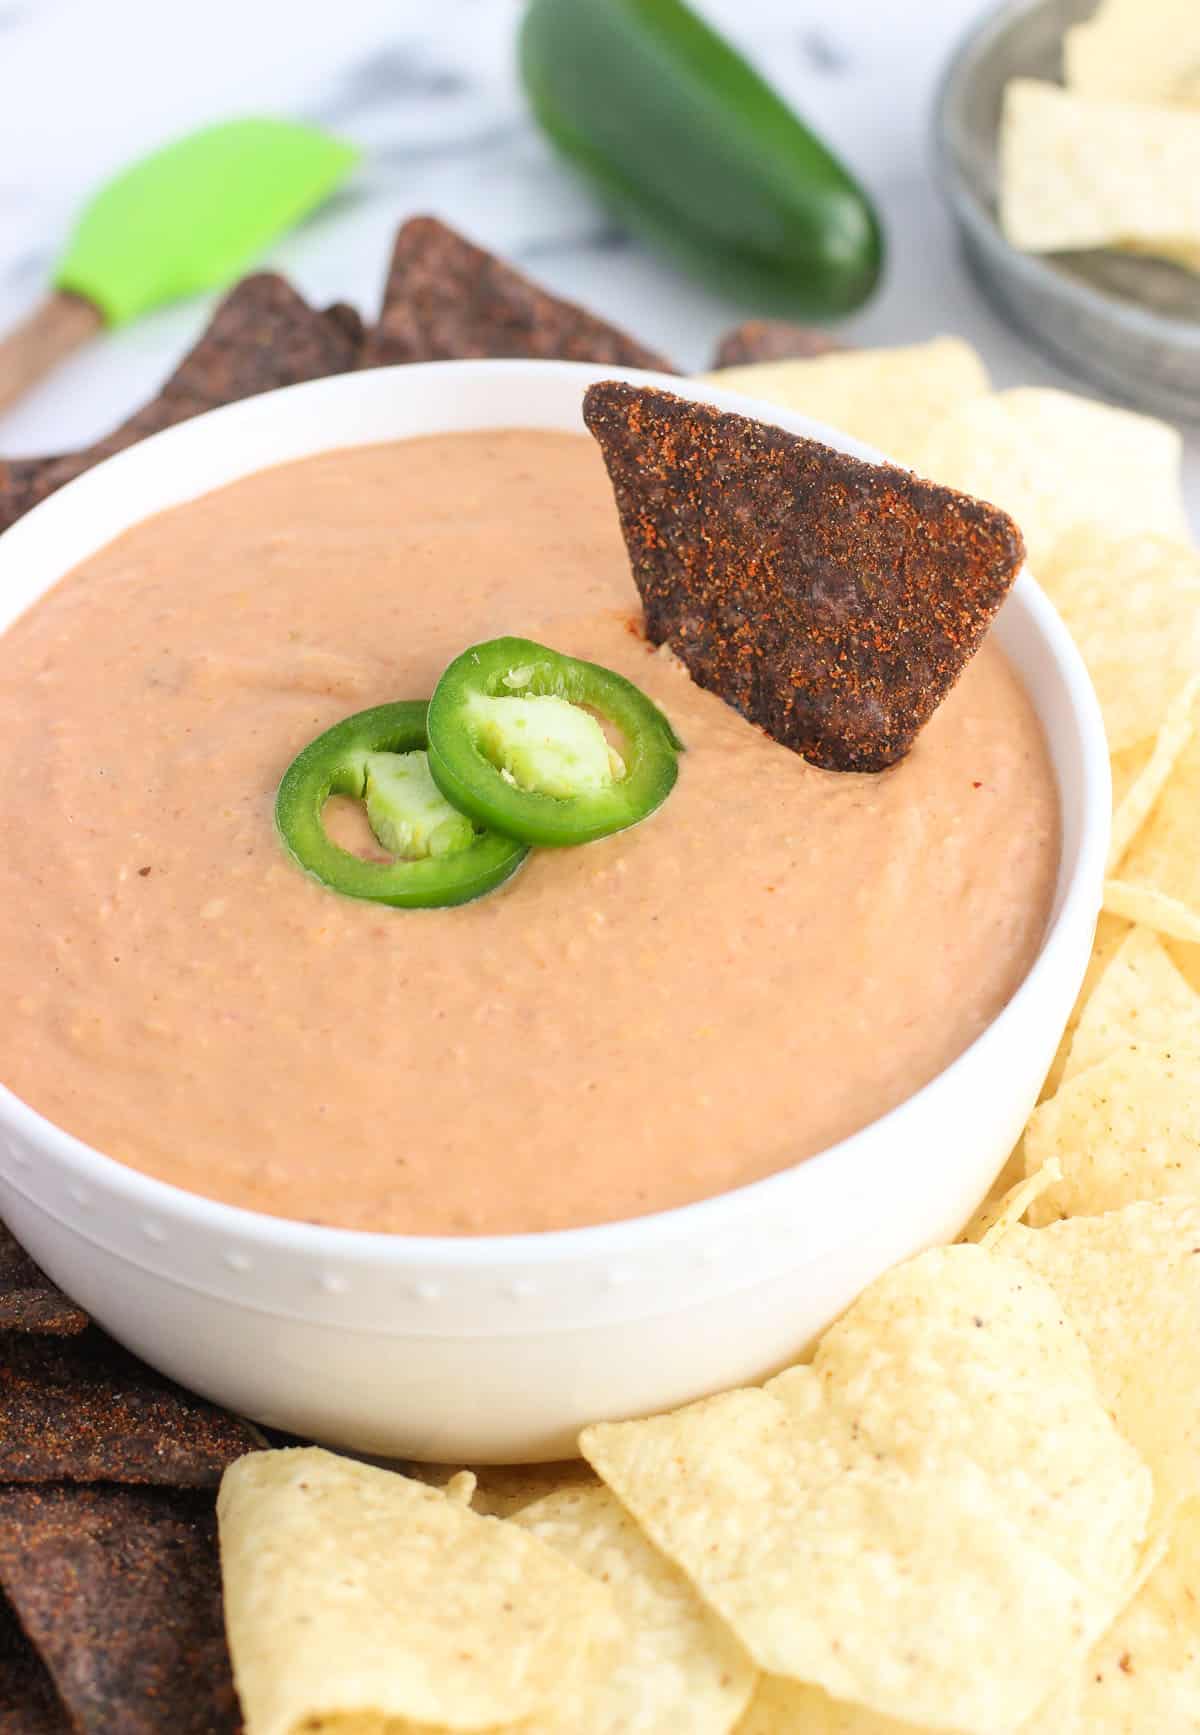 A tortilla chip dunked into the bowl of bean dip.